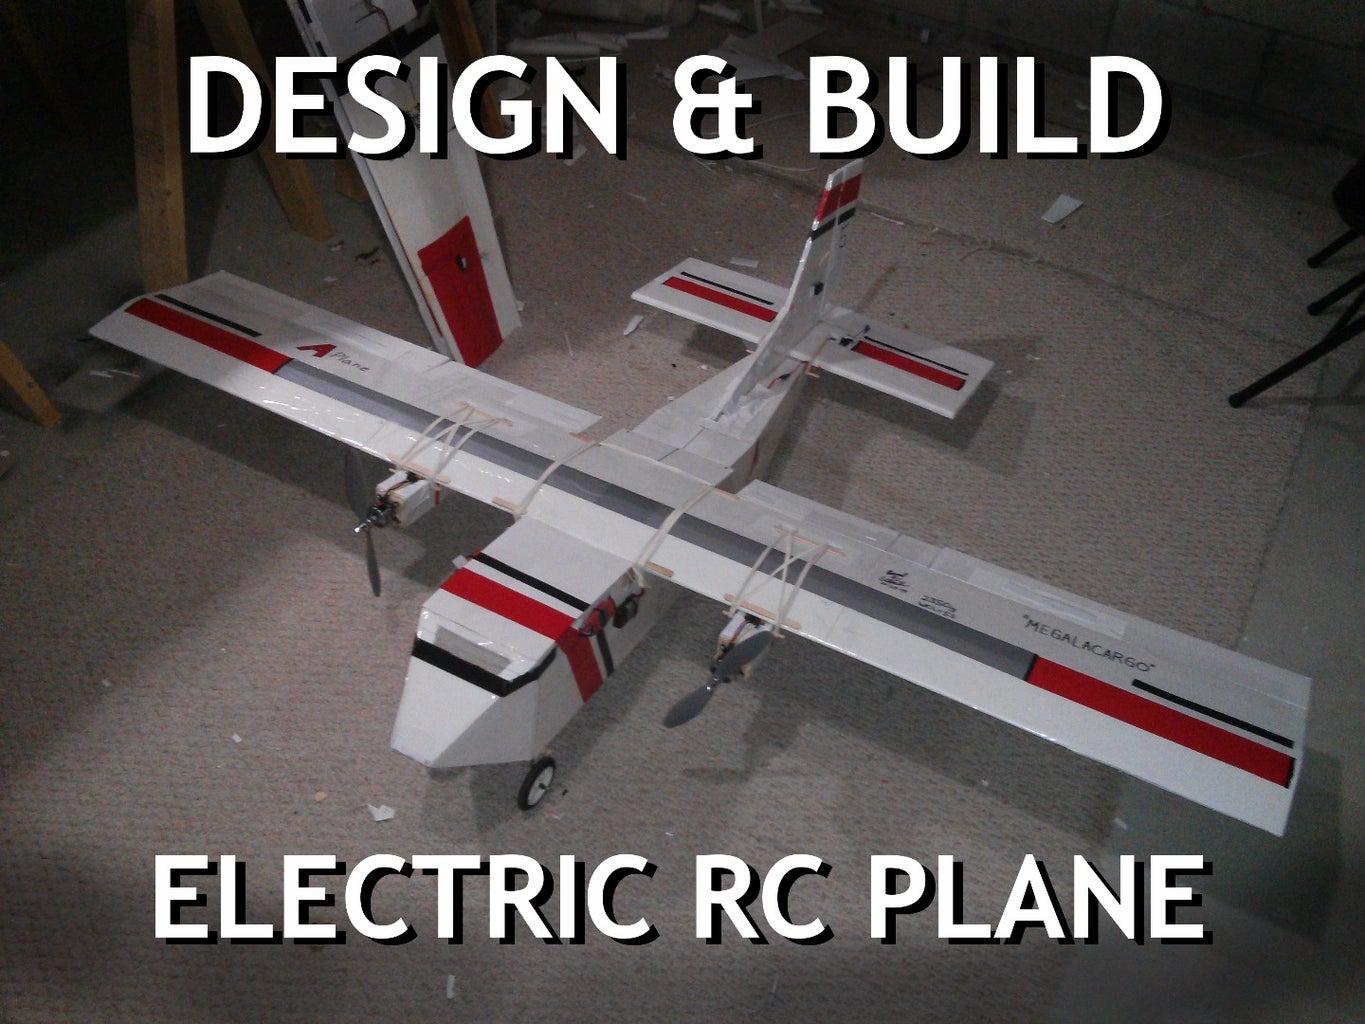 Building Large Rc Planes: Design & Planning for Large RC Planes